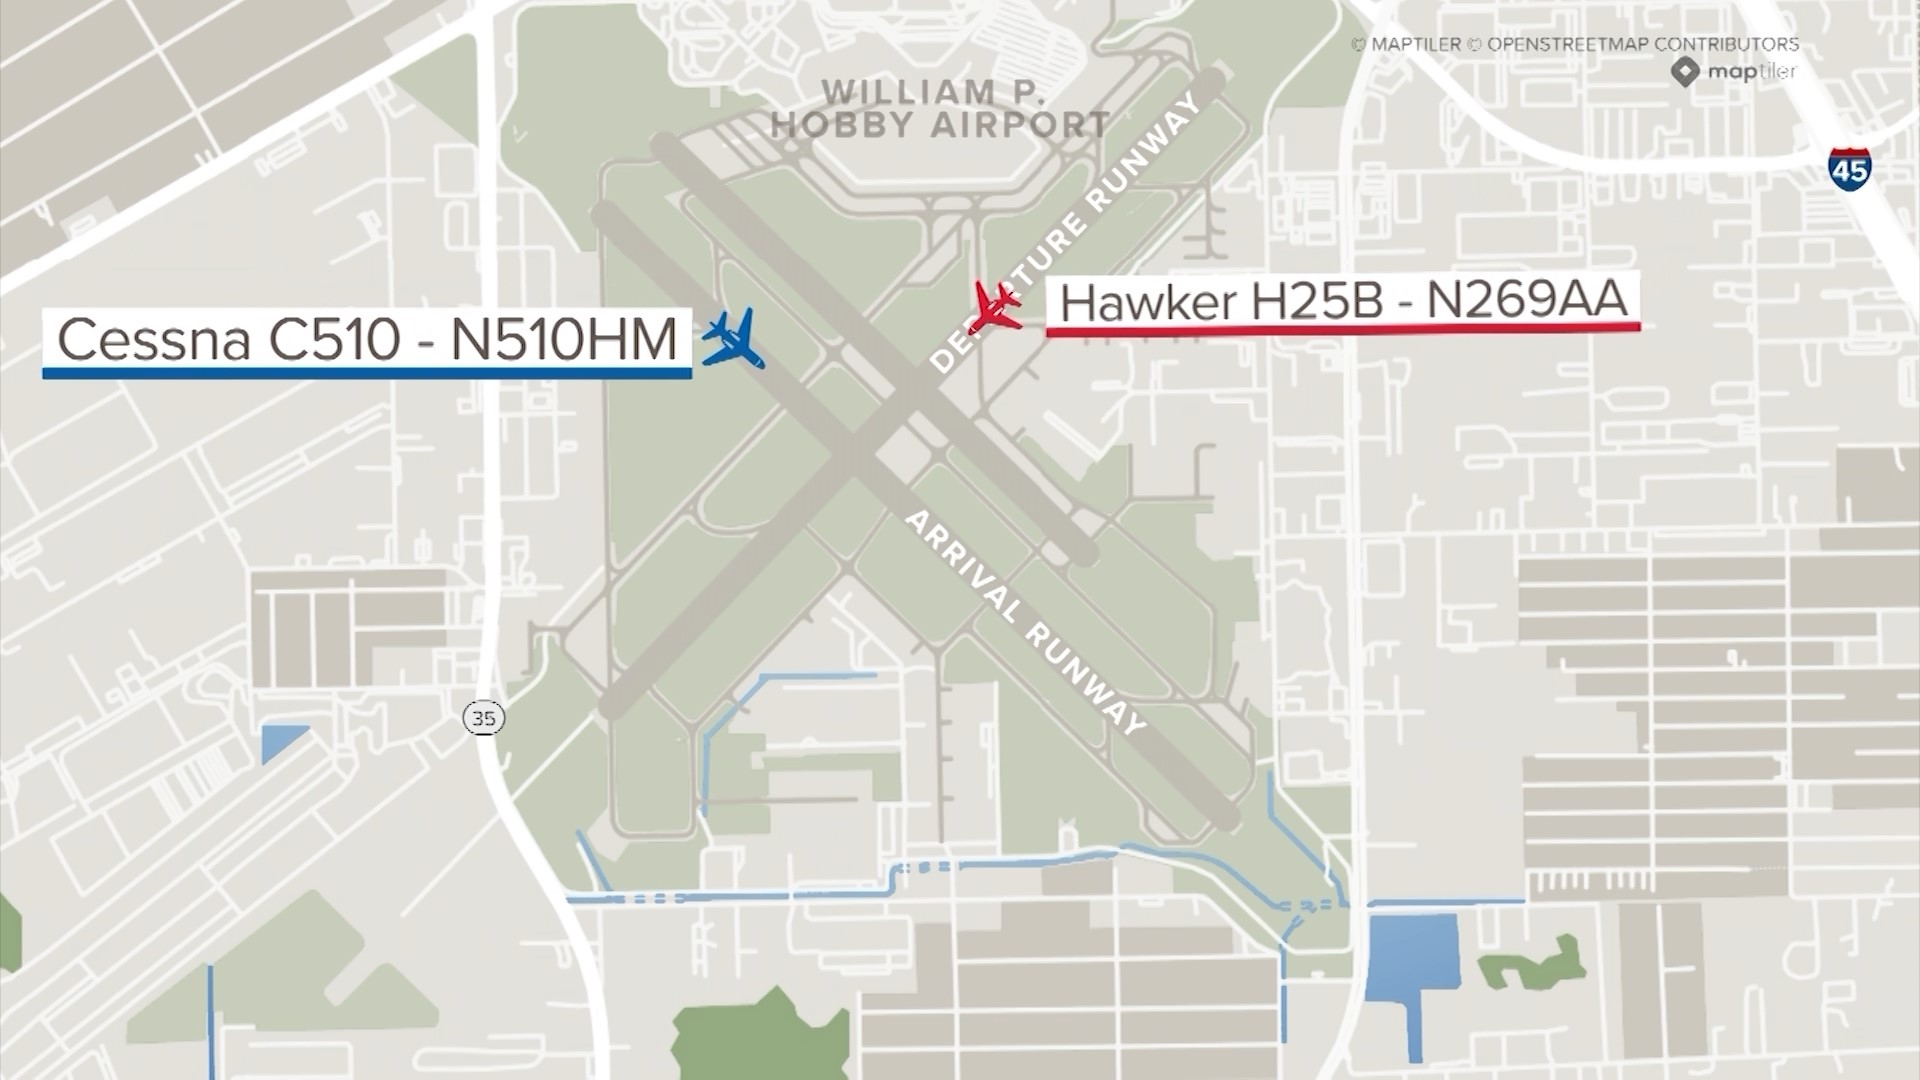 Houston's William P. Hobby Airport was closed for more than three hours on Tuesday after two private planes crashed into each other on a runway.